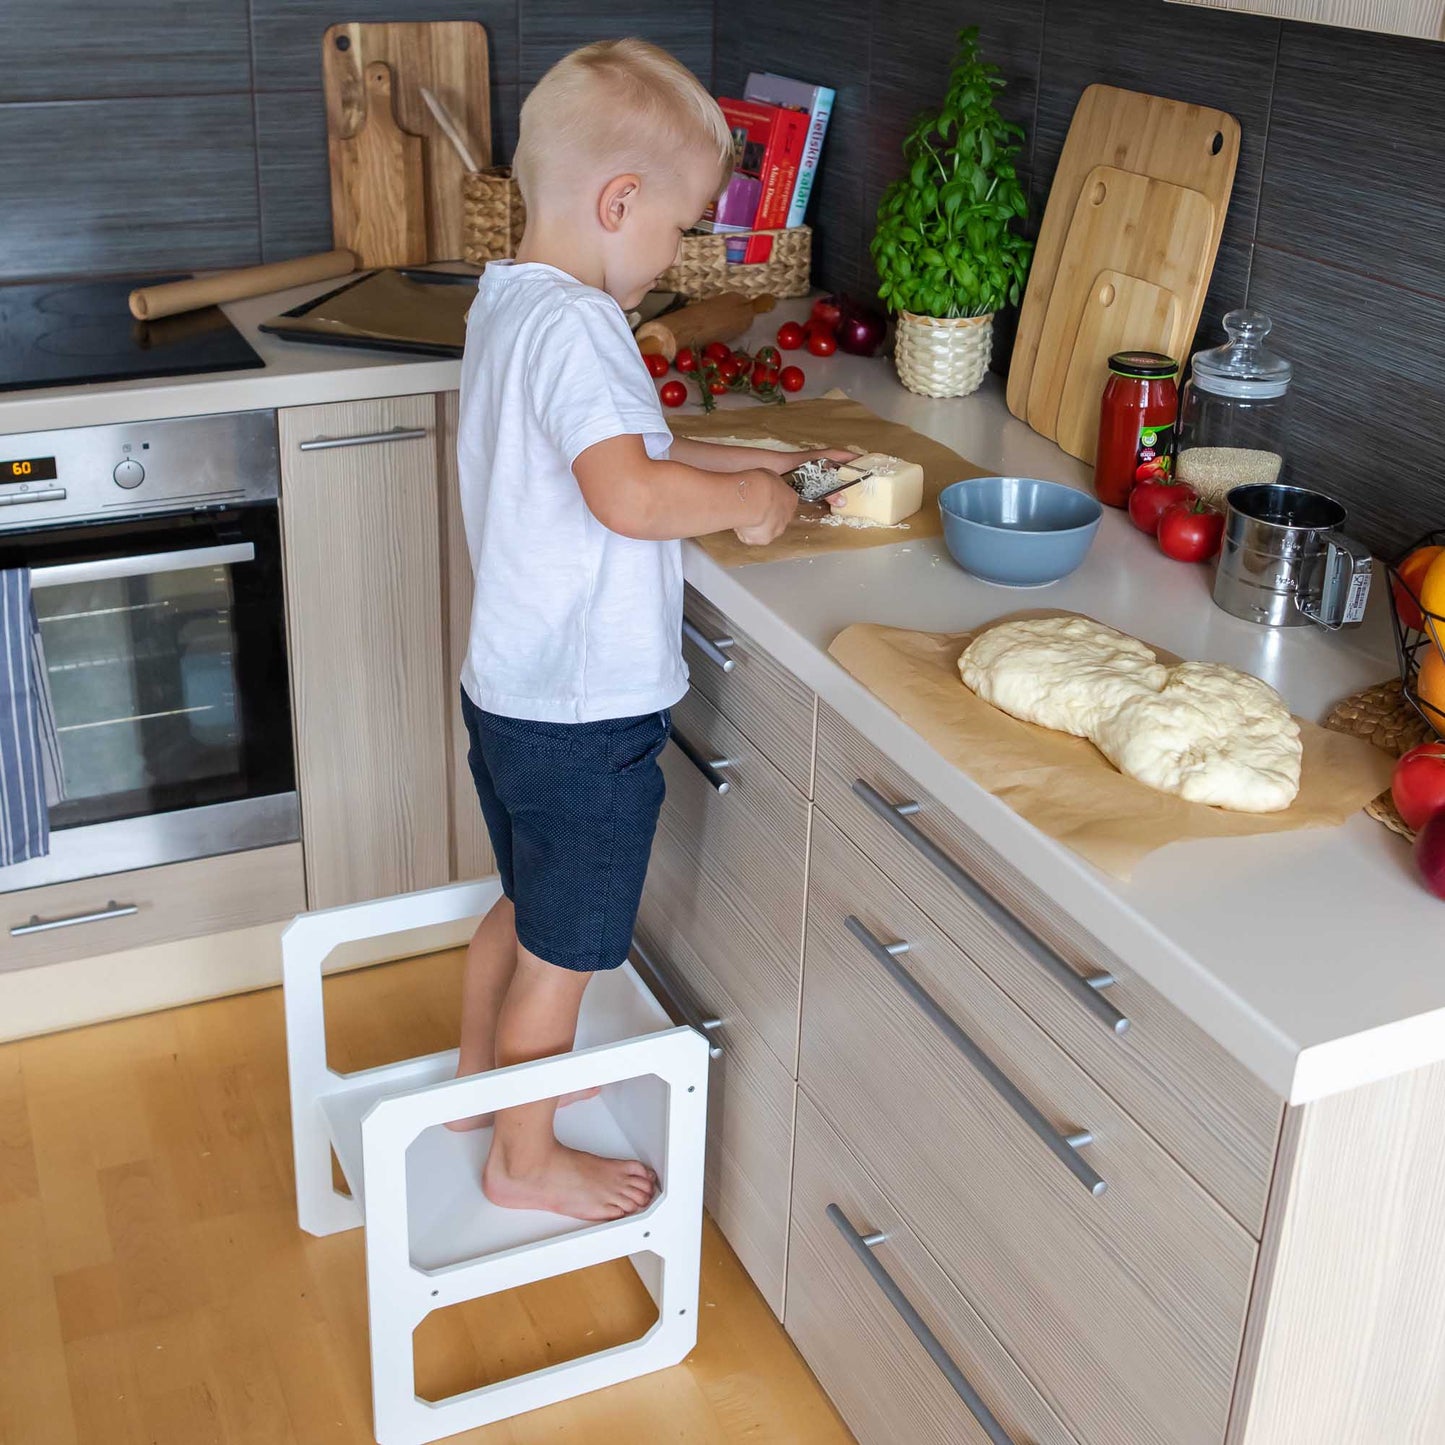 A toddler standing on a Montessori weaning chair from Sweet Home From Wood in a kitchen.